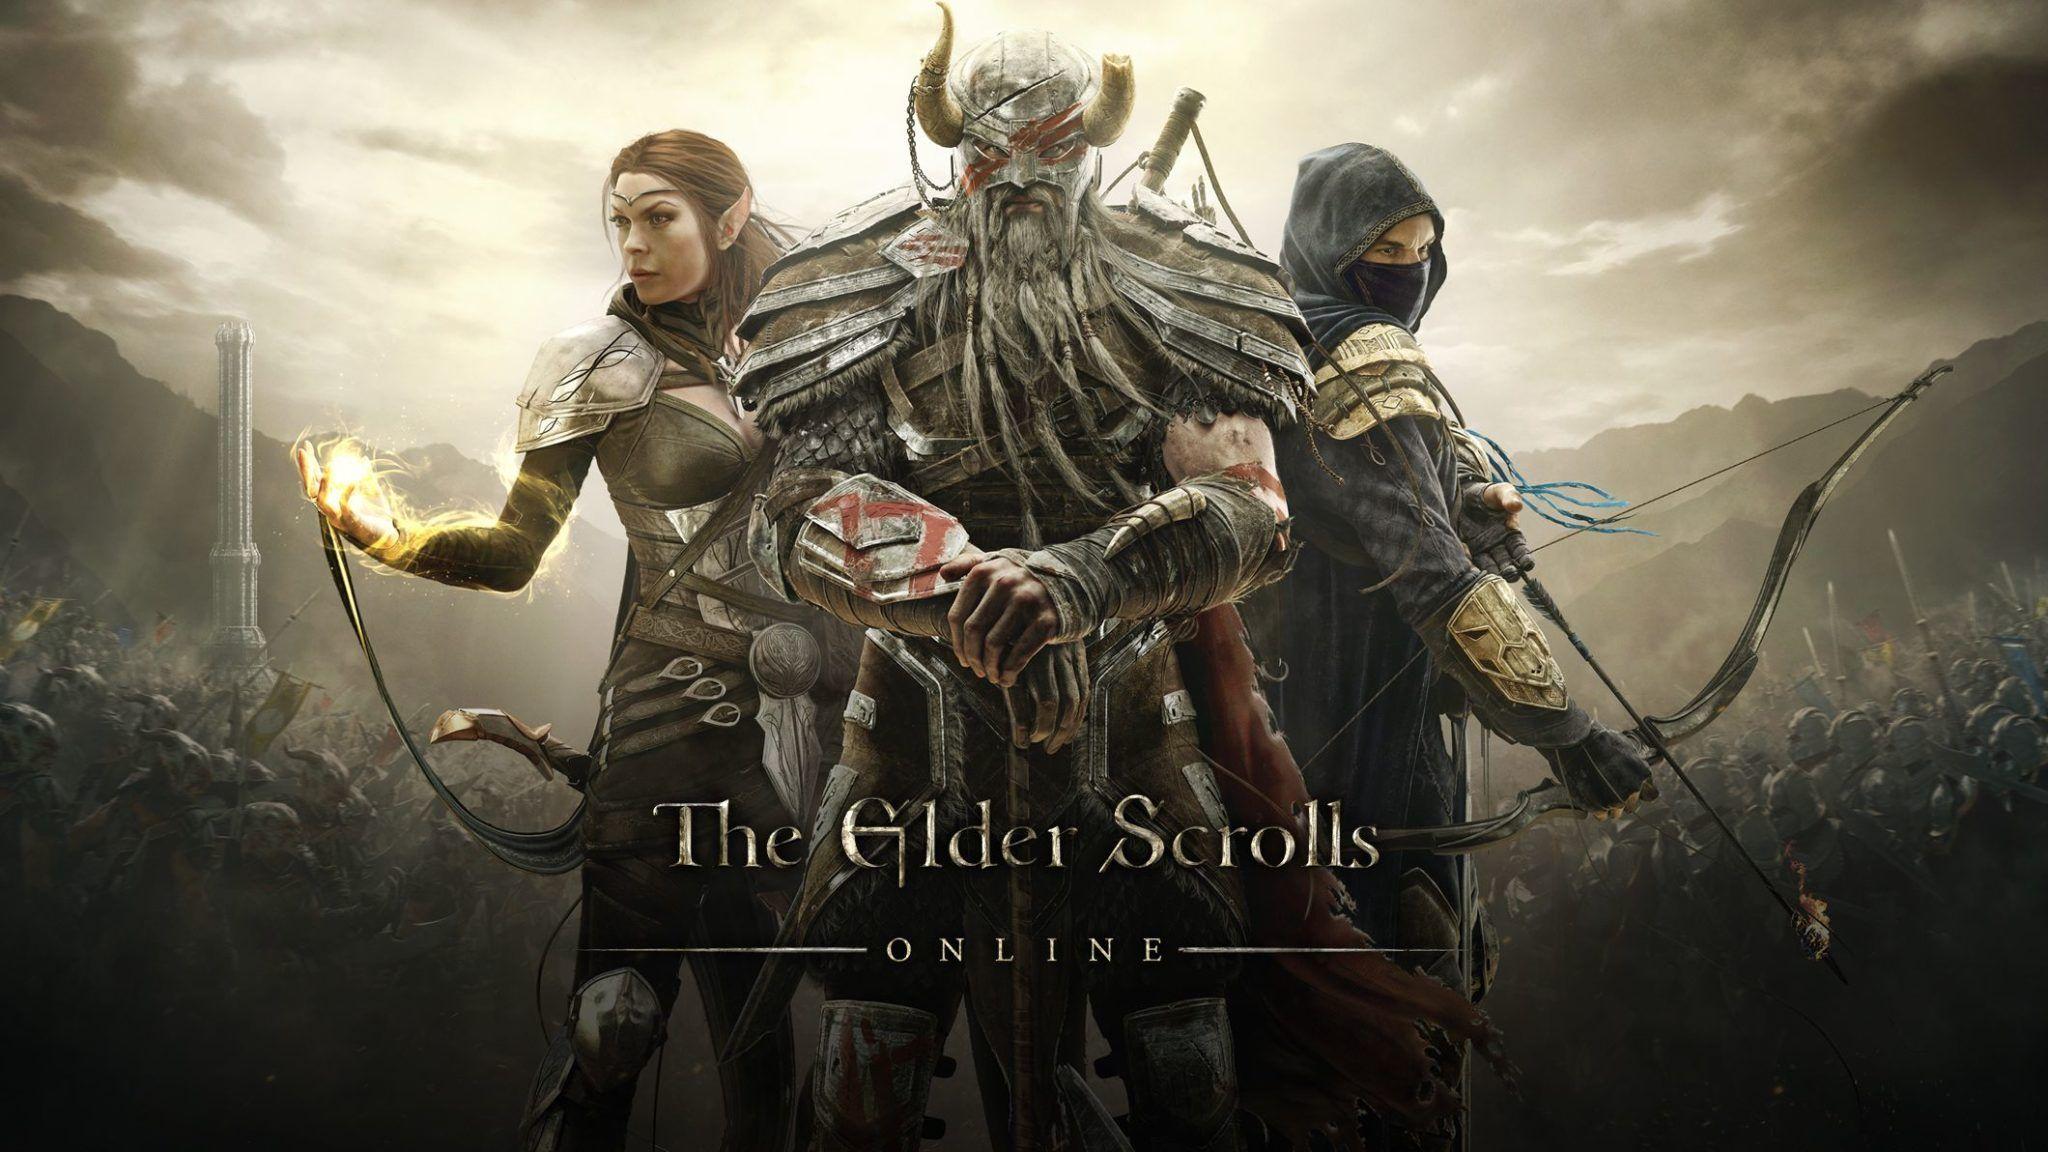 The Elder Scrolls 6 release date speculation, location, news and